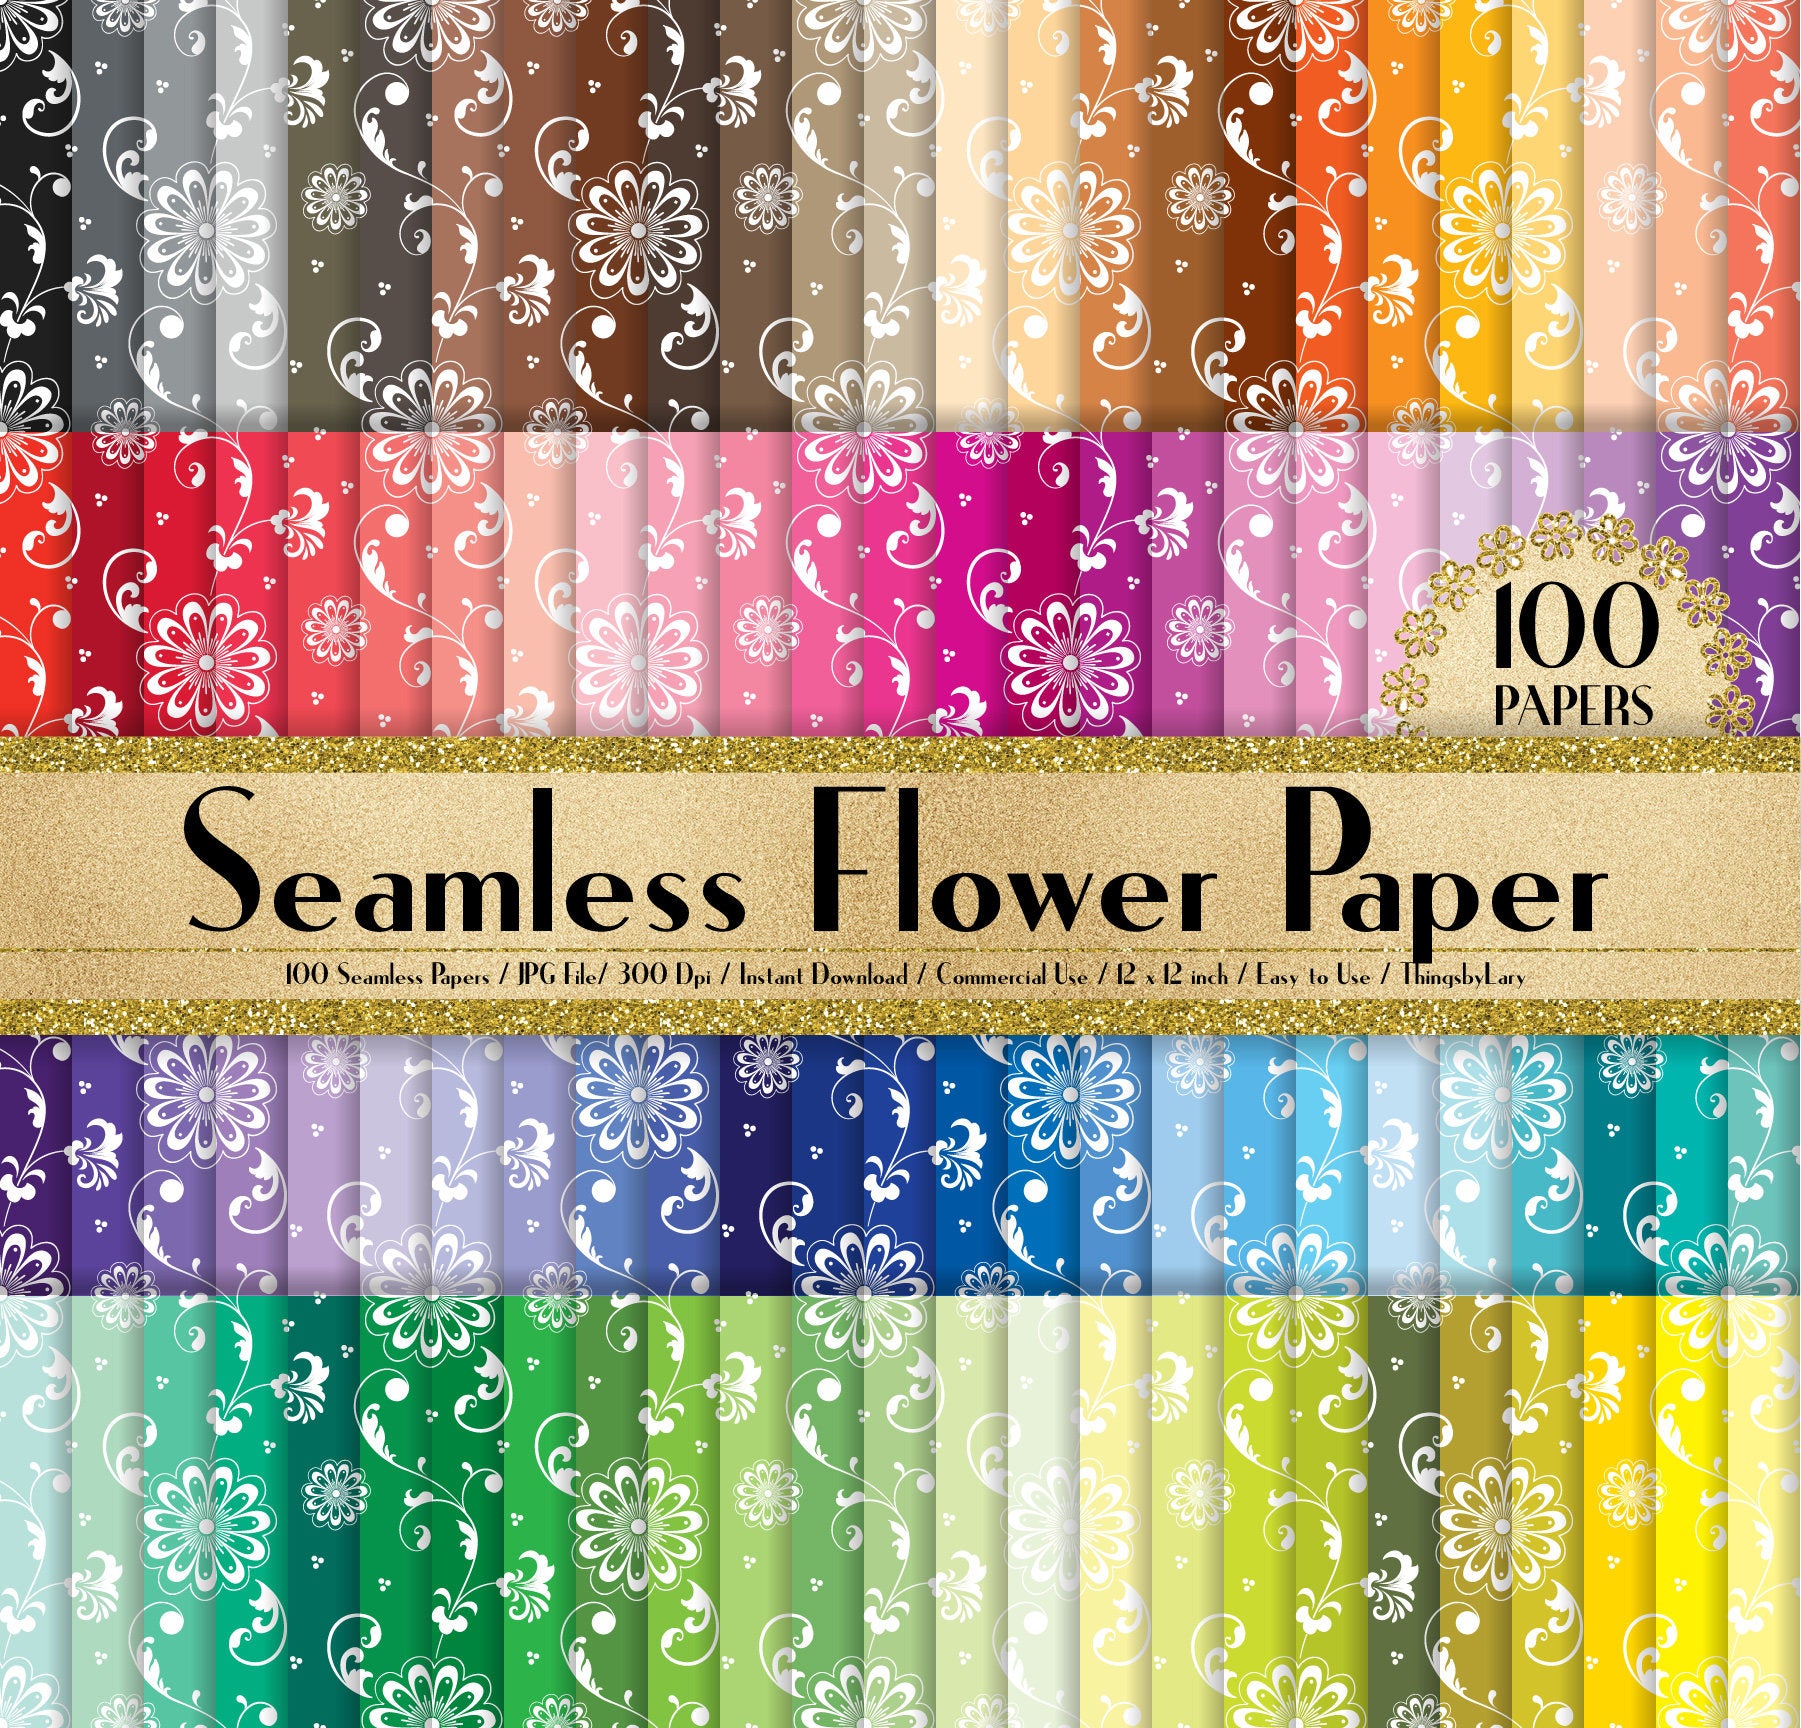 100 Seamless Flower Papers in 12&quot; x 12&quot;, 300 Dpi Planner Paper, Scrapbook Paper,Rainbow Paper,100 Flower Papers,100 Floral Papers